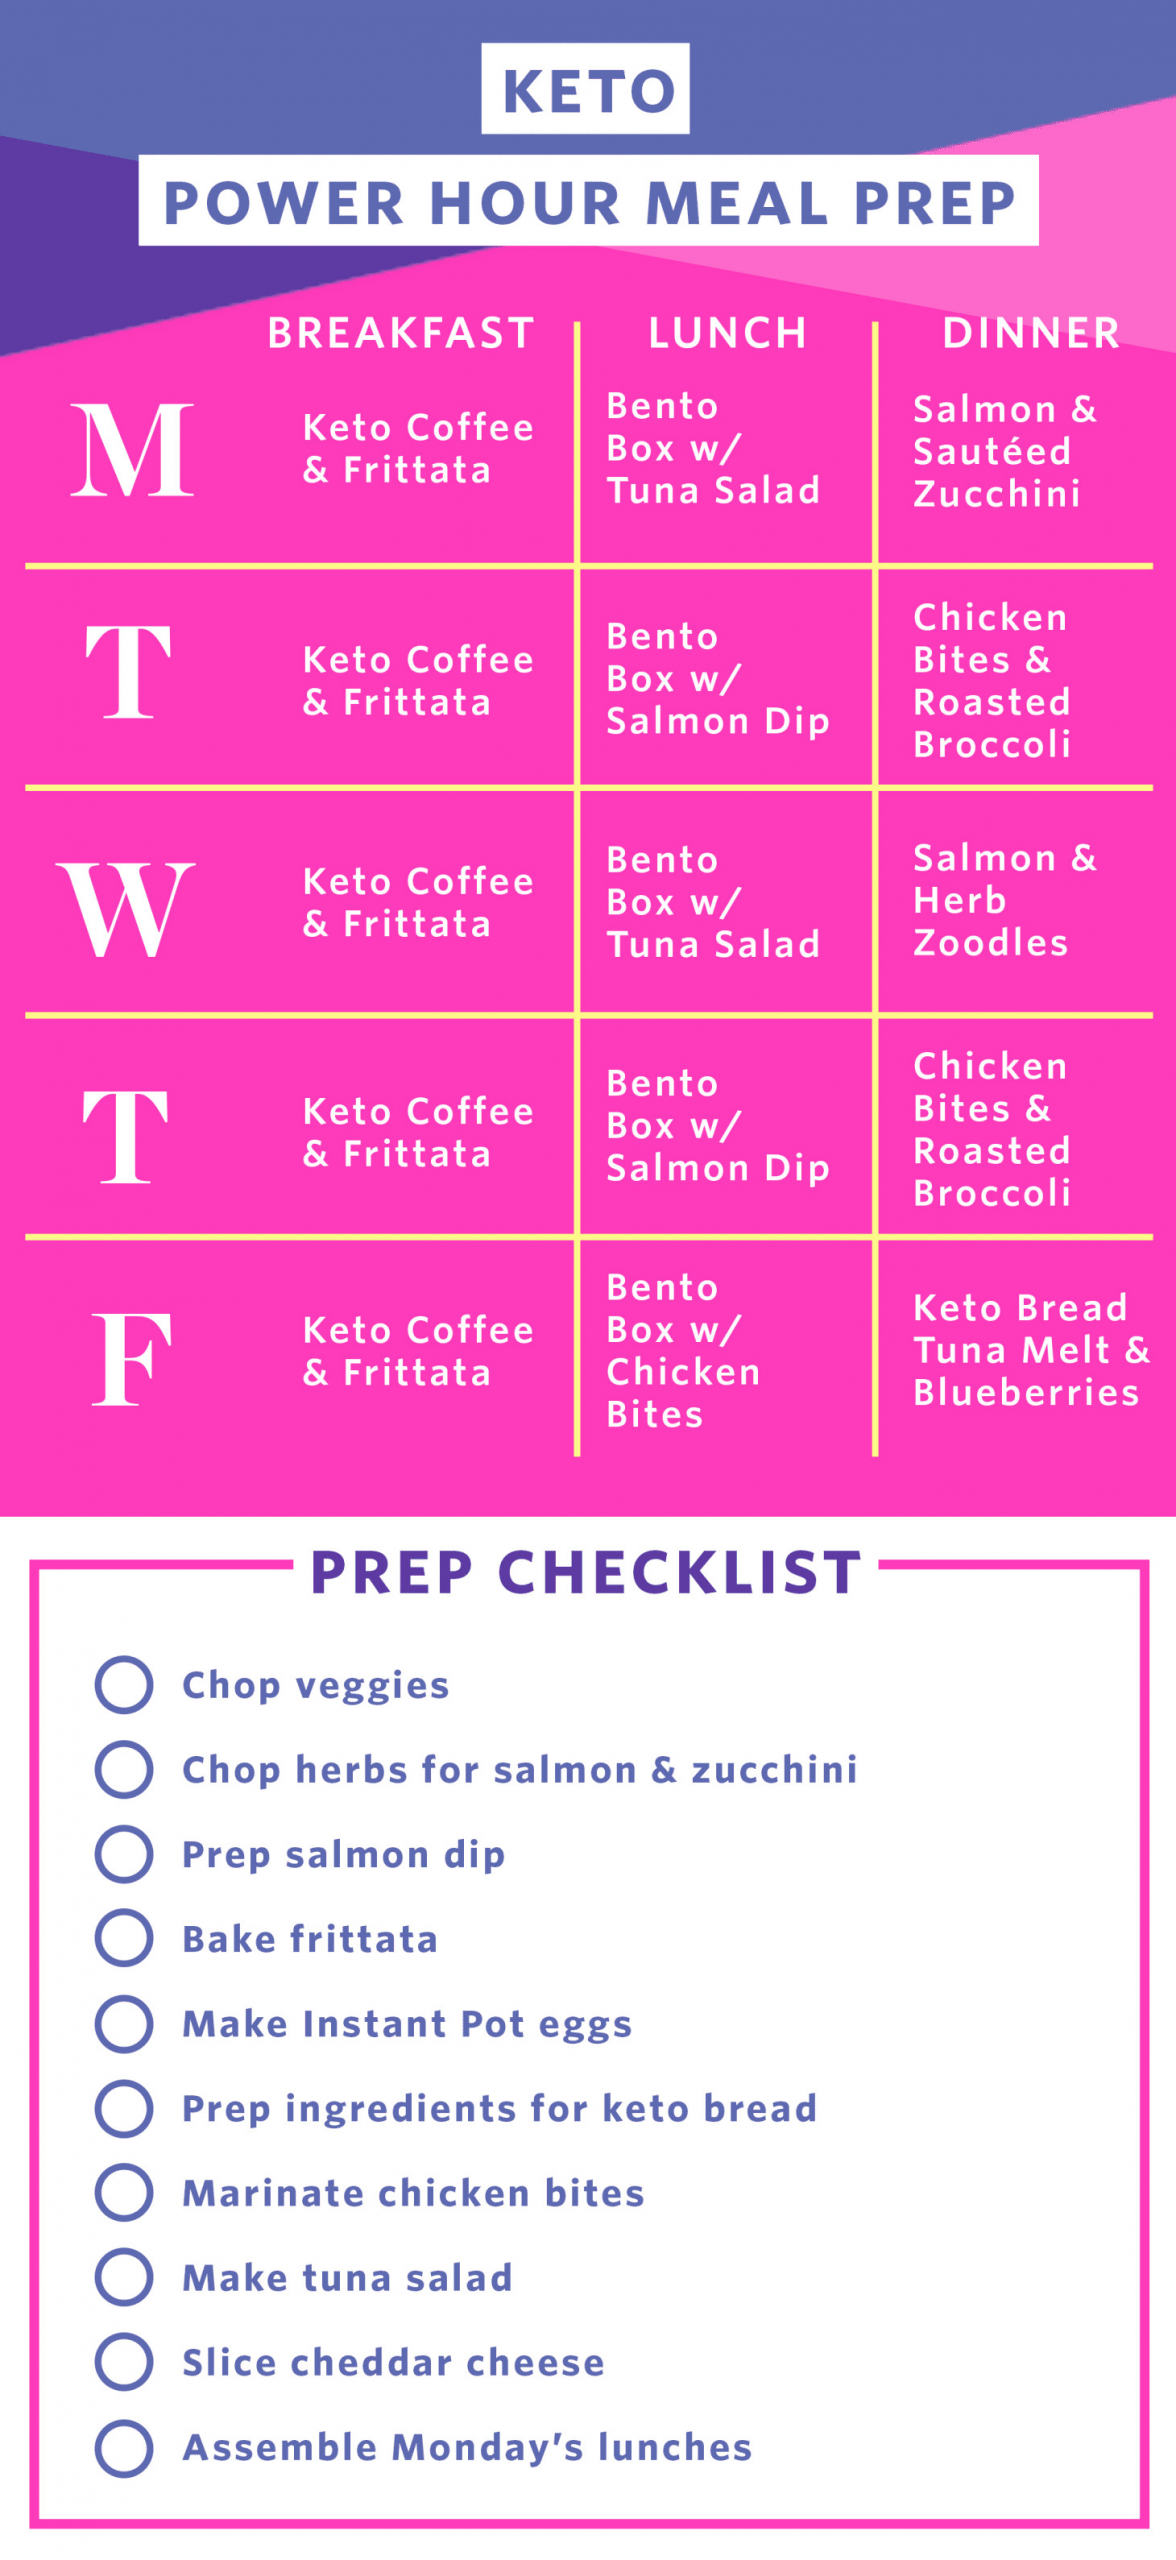 Keto For Beginners Meal Plan On A Budget
 Fast Keto Meal Prep in Under 2 Hours